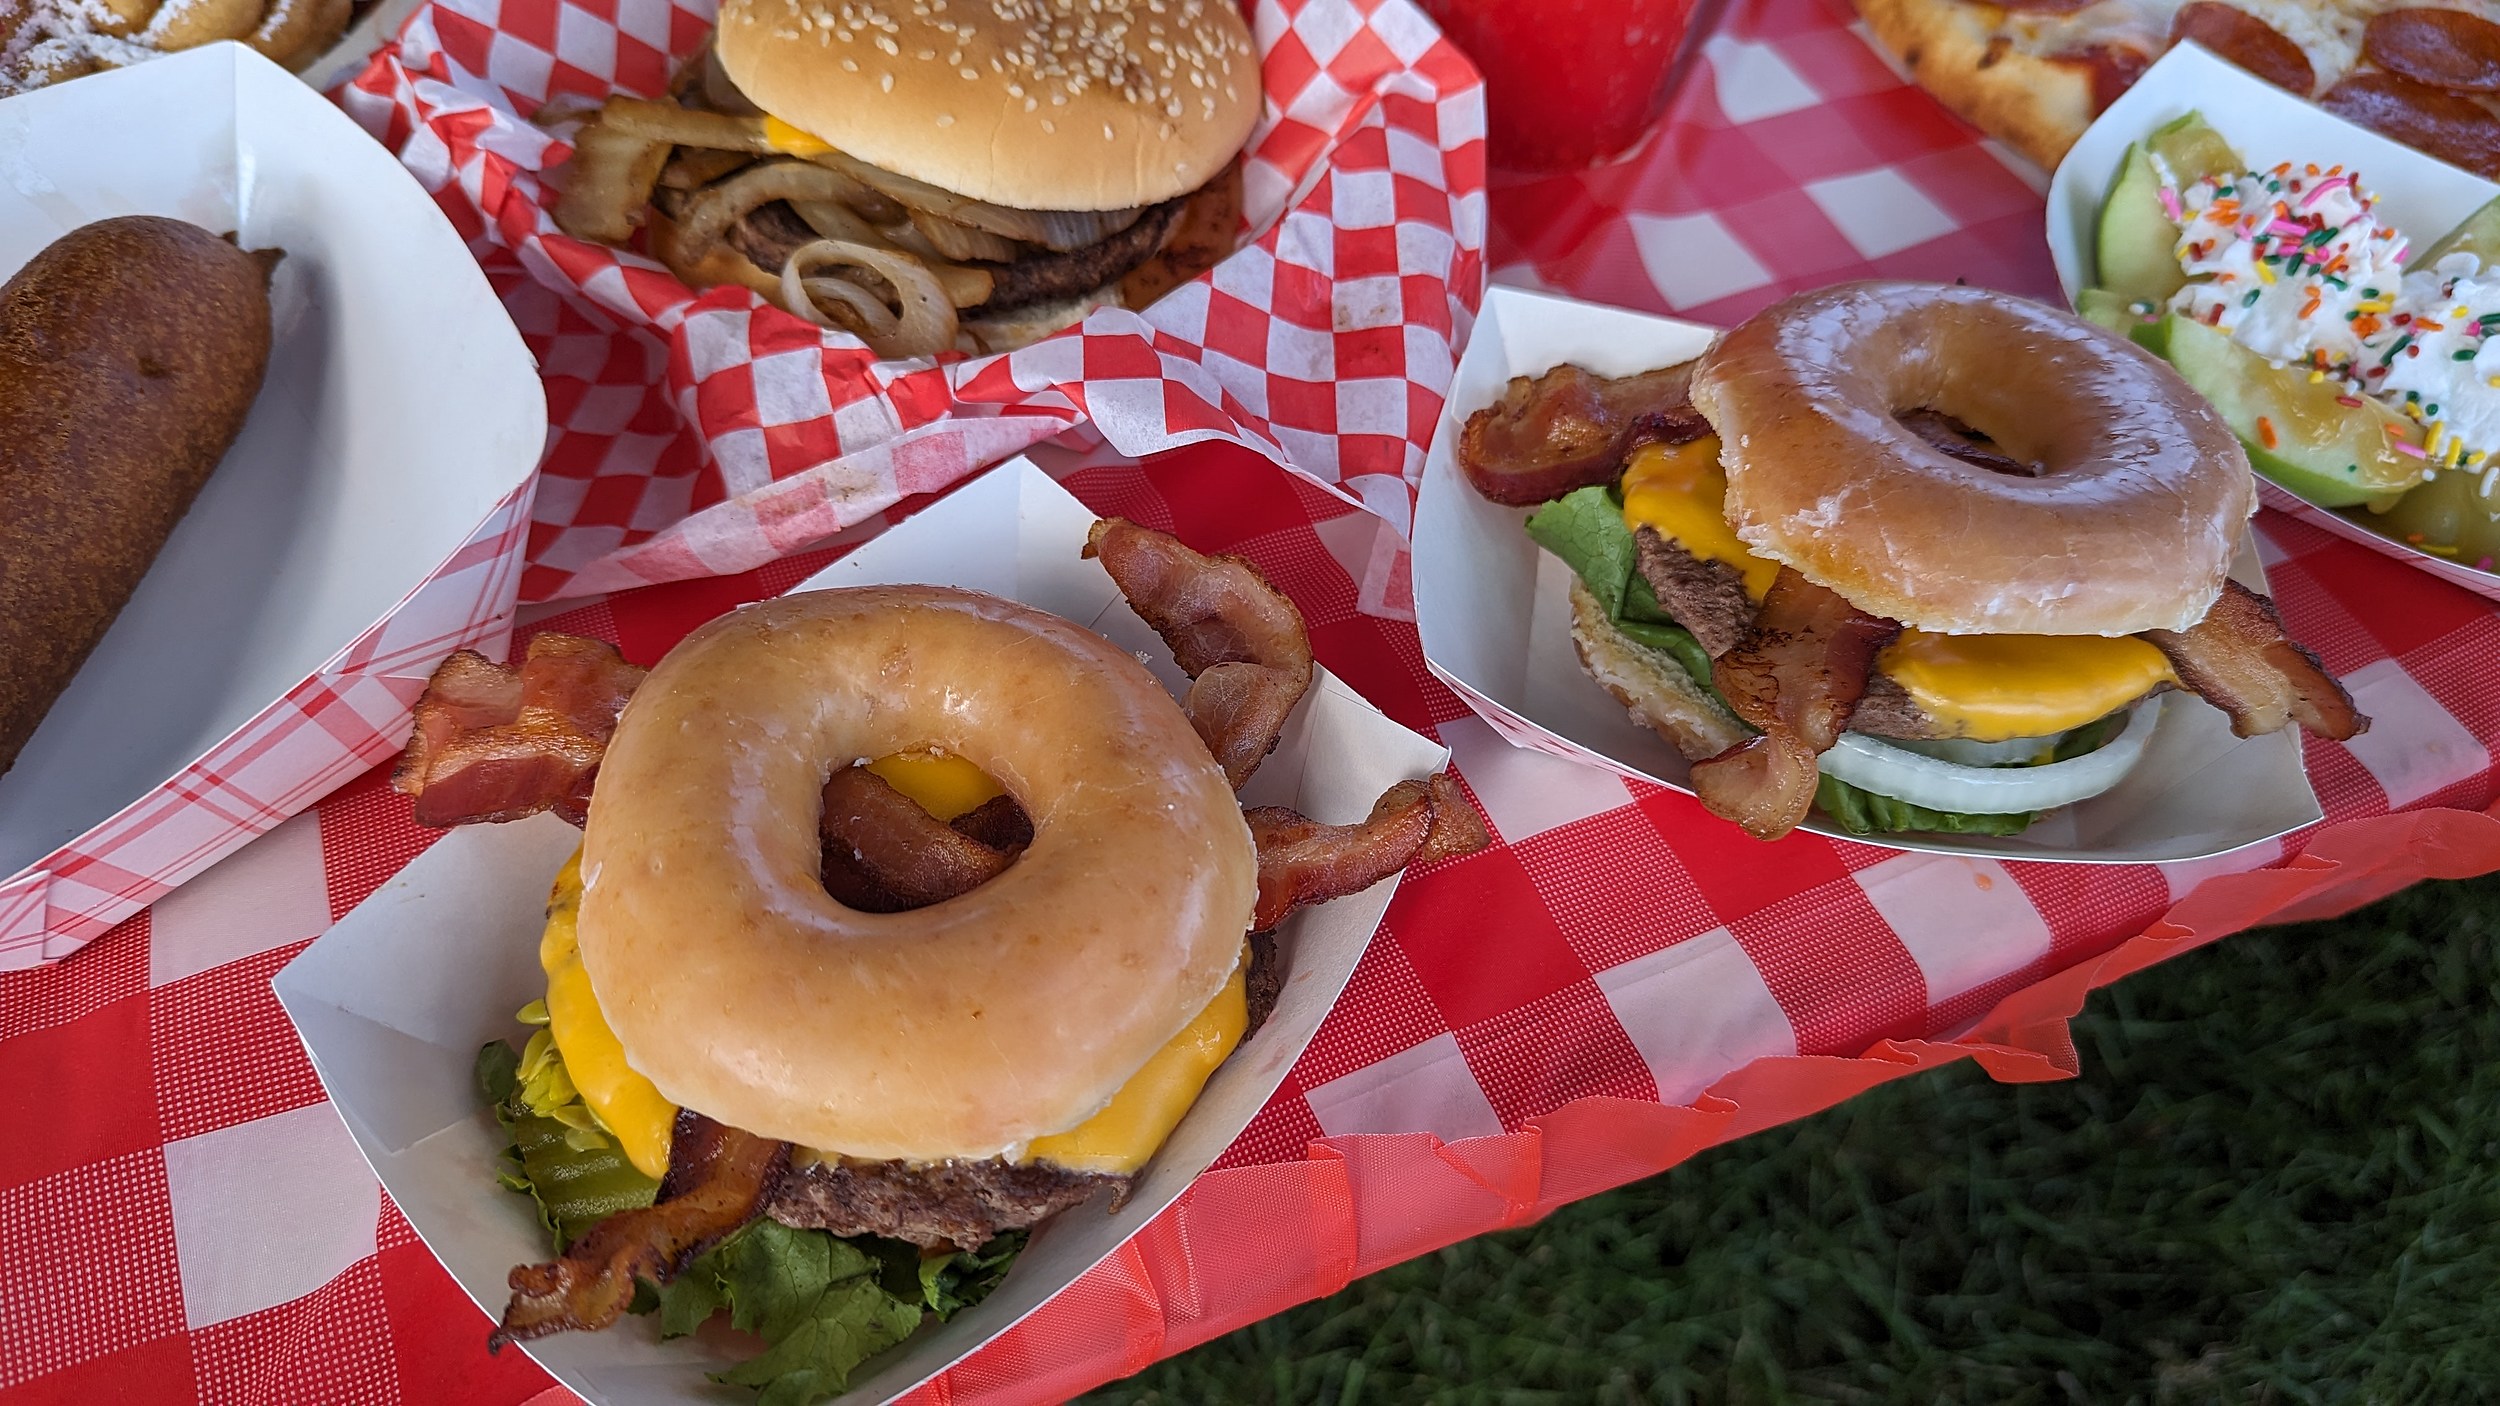 Krispy Kreme Burger, Pickle Pizza Among New Foods at This Years Central Washington State Fair